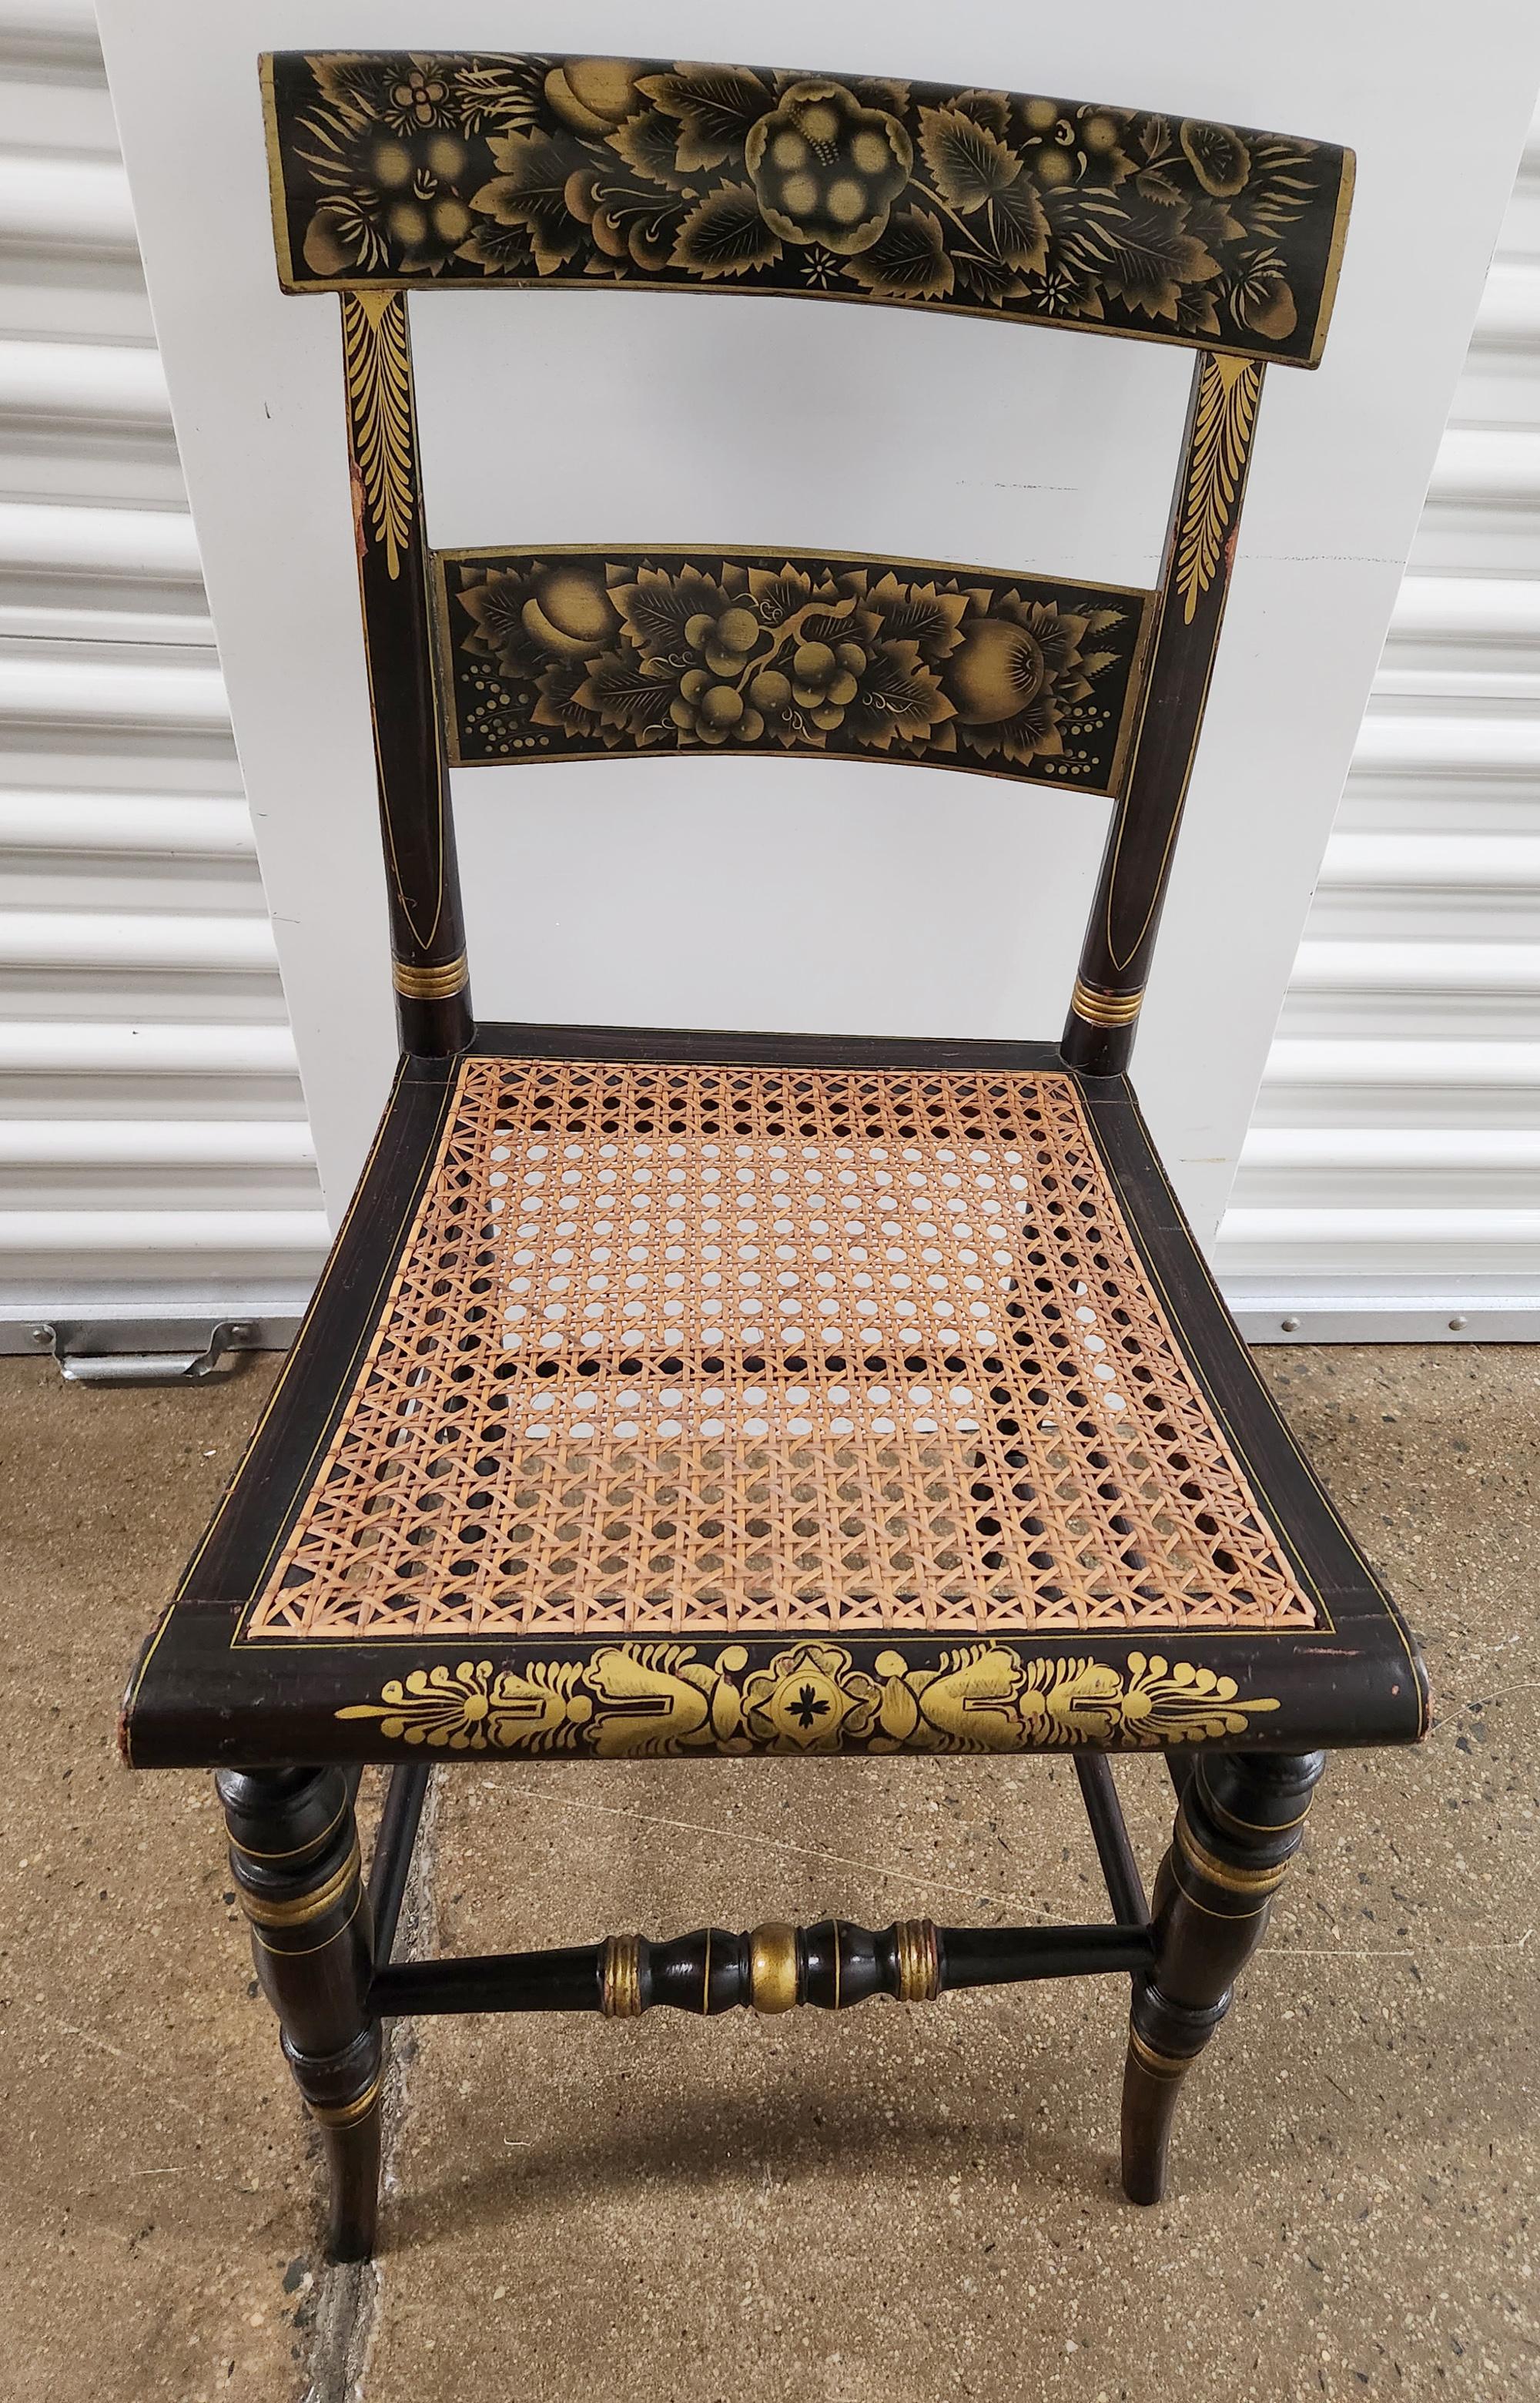 American Classical New England Hitchcock Chairs Rosewood Painted & Stenciled Flowering Plants For Sale